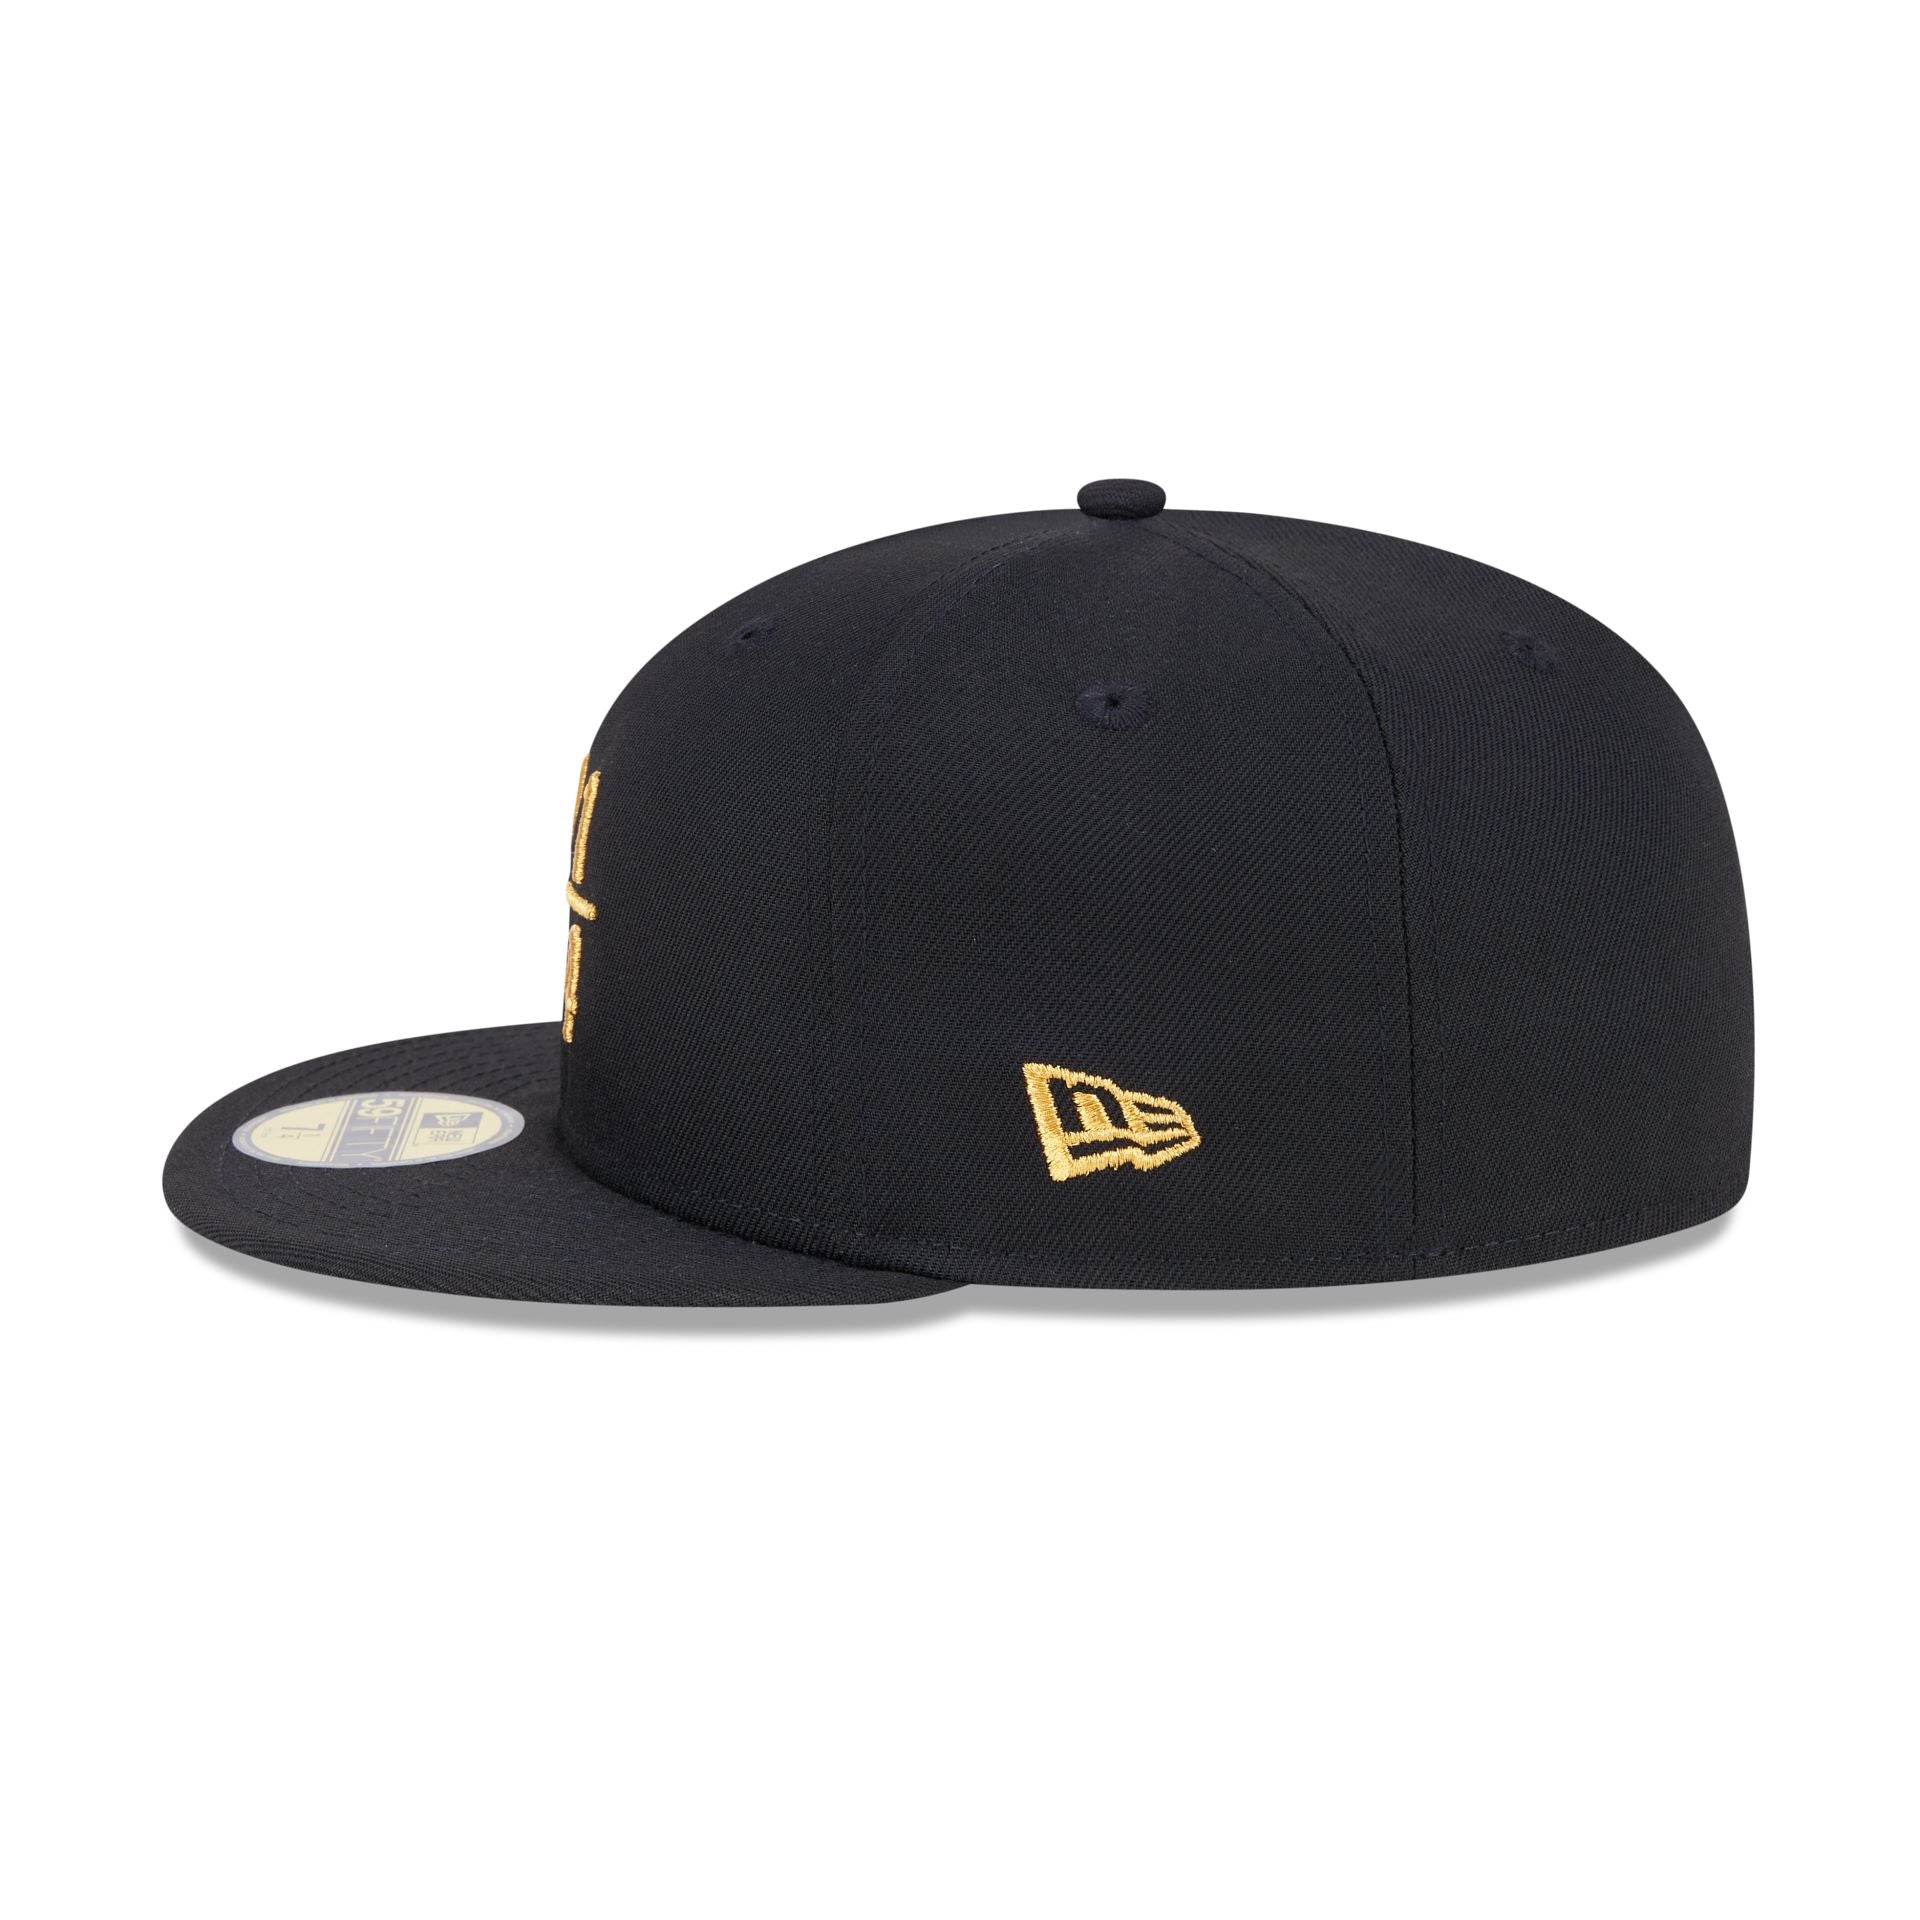 New Era Cap Signature Size 7 1/4 Black 59FIFTY Fitted